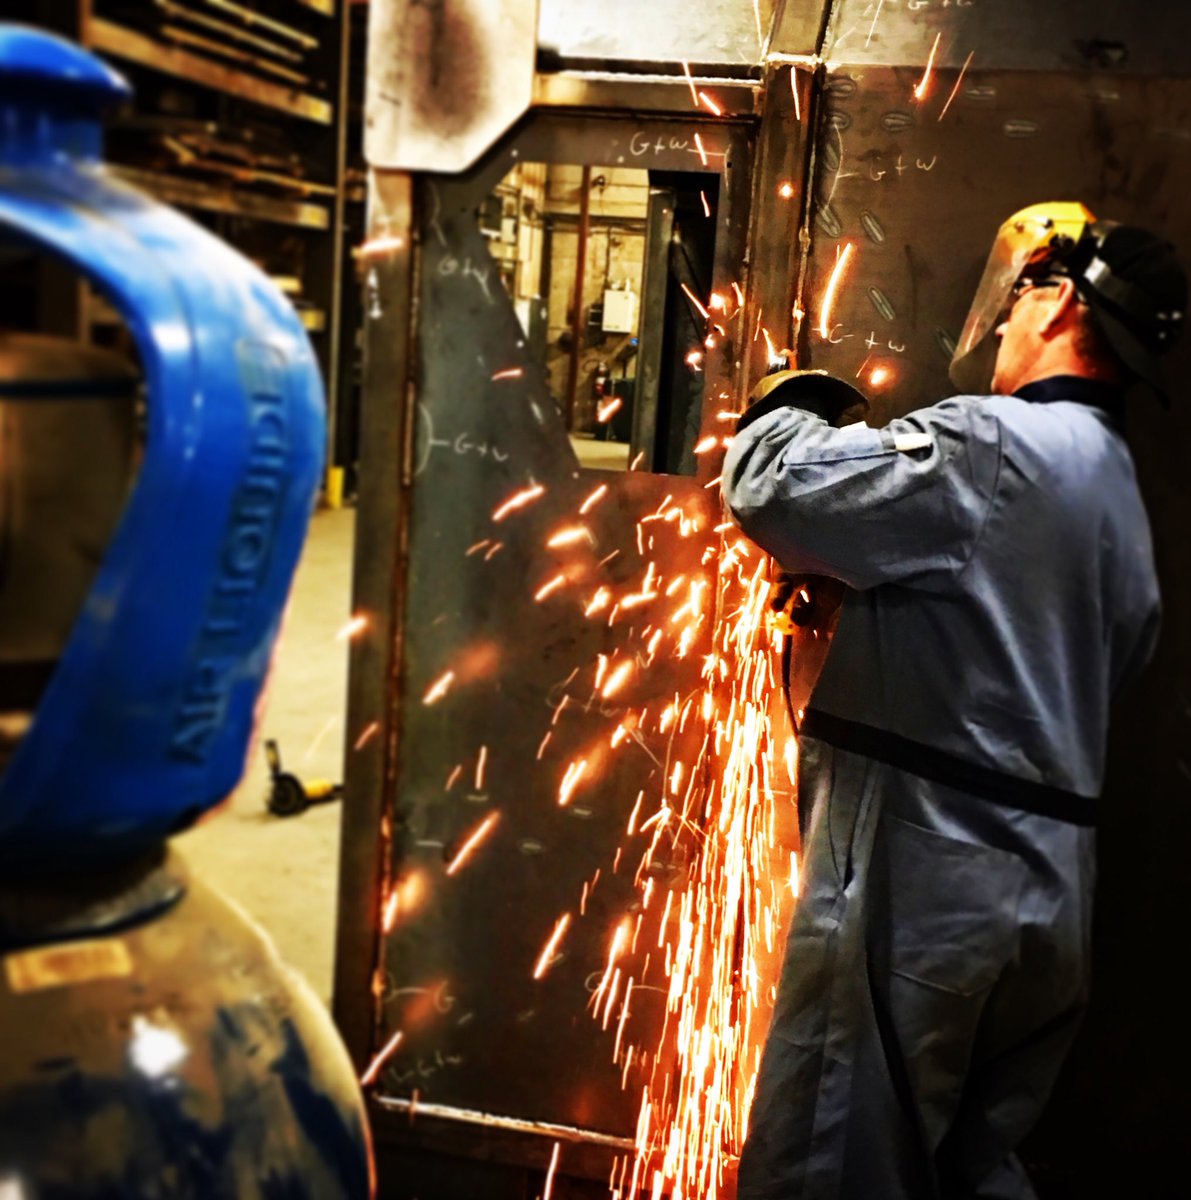 Our TK2 #MineRefugeChambers are fabricated by Red Seal Journeymen welders with their W49 Certification. The Red Seal program is a Canadian Standard of Excellence for skilled trades. We build the Best by the Best! #mining #minerefuge #minesafety #madeincanada #canadianmanufacturer